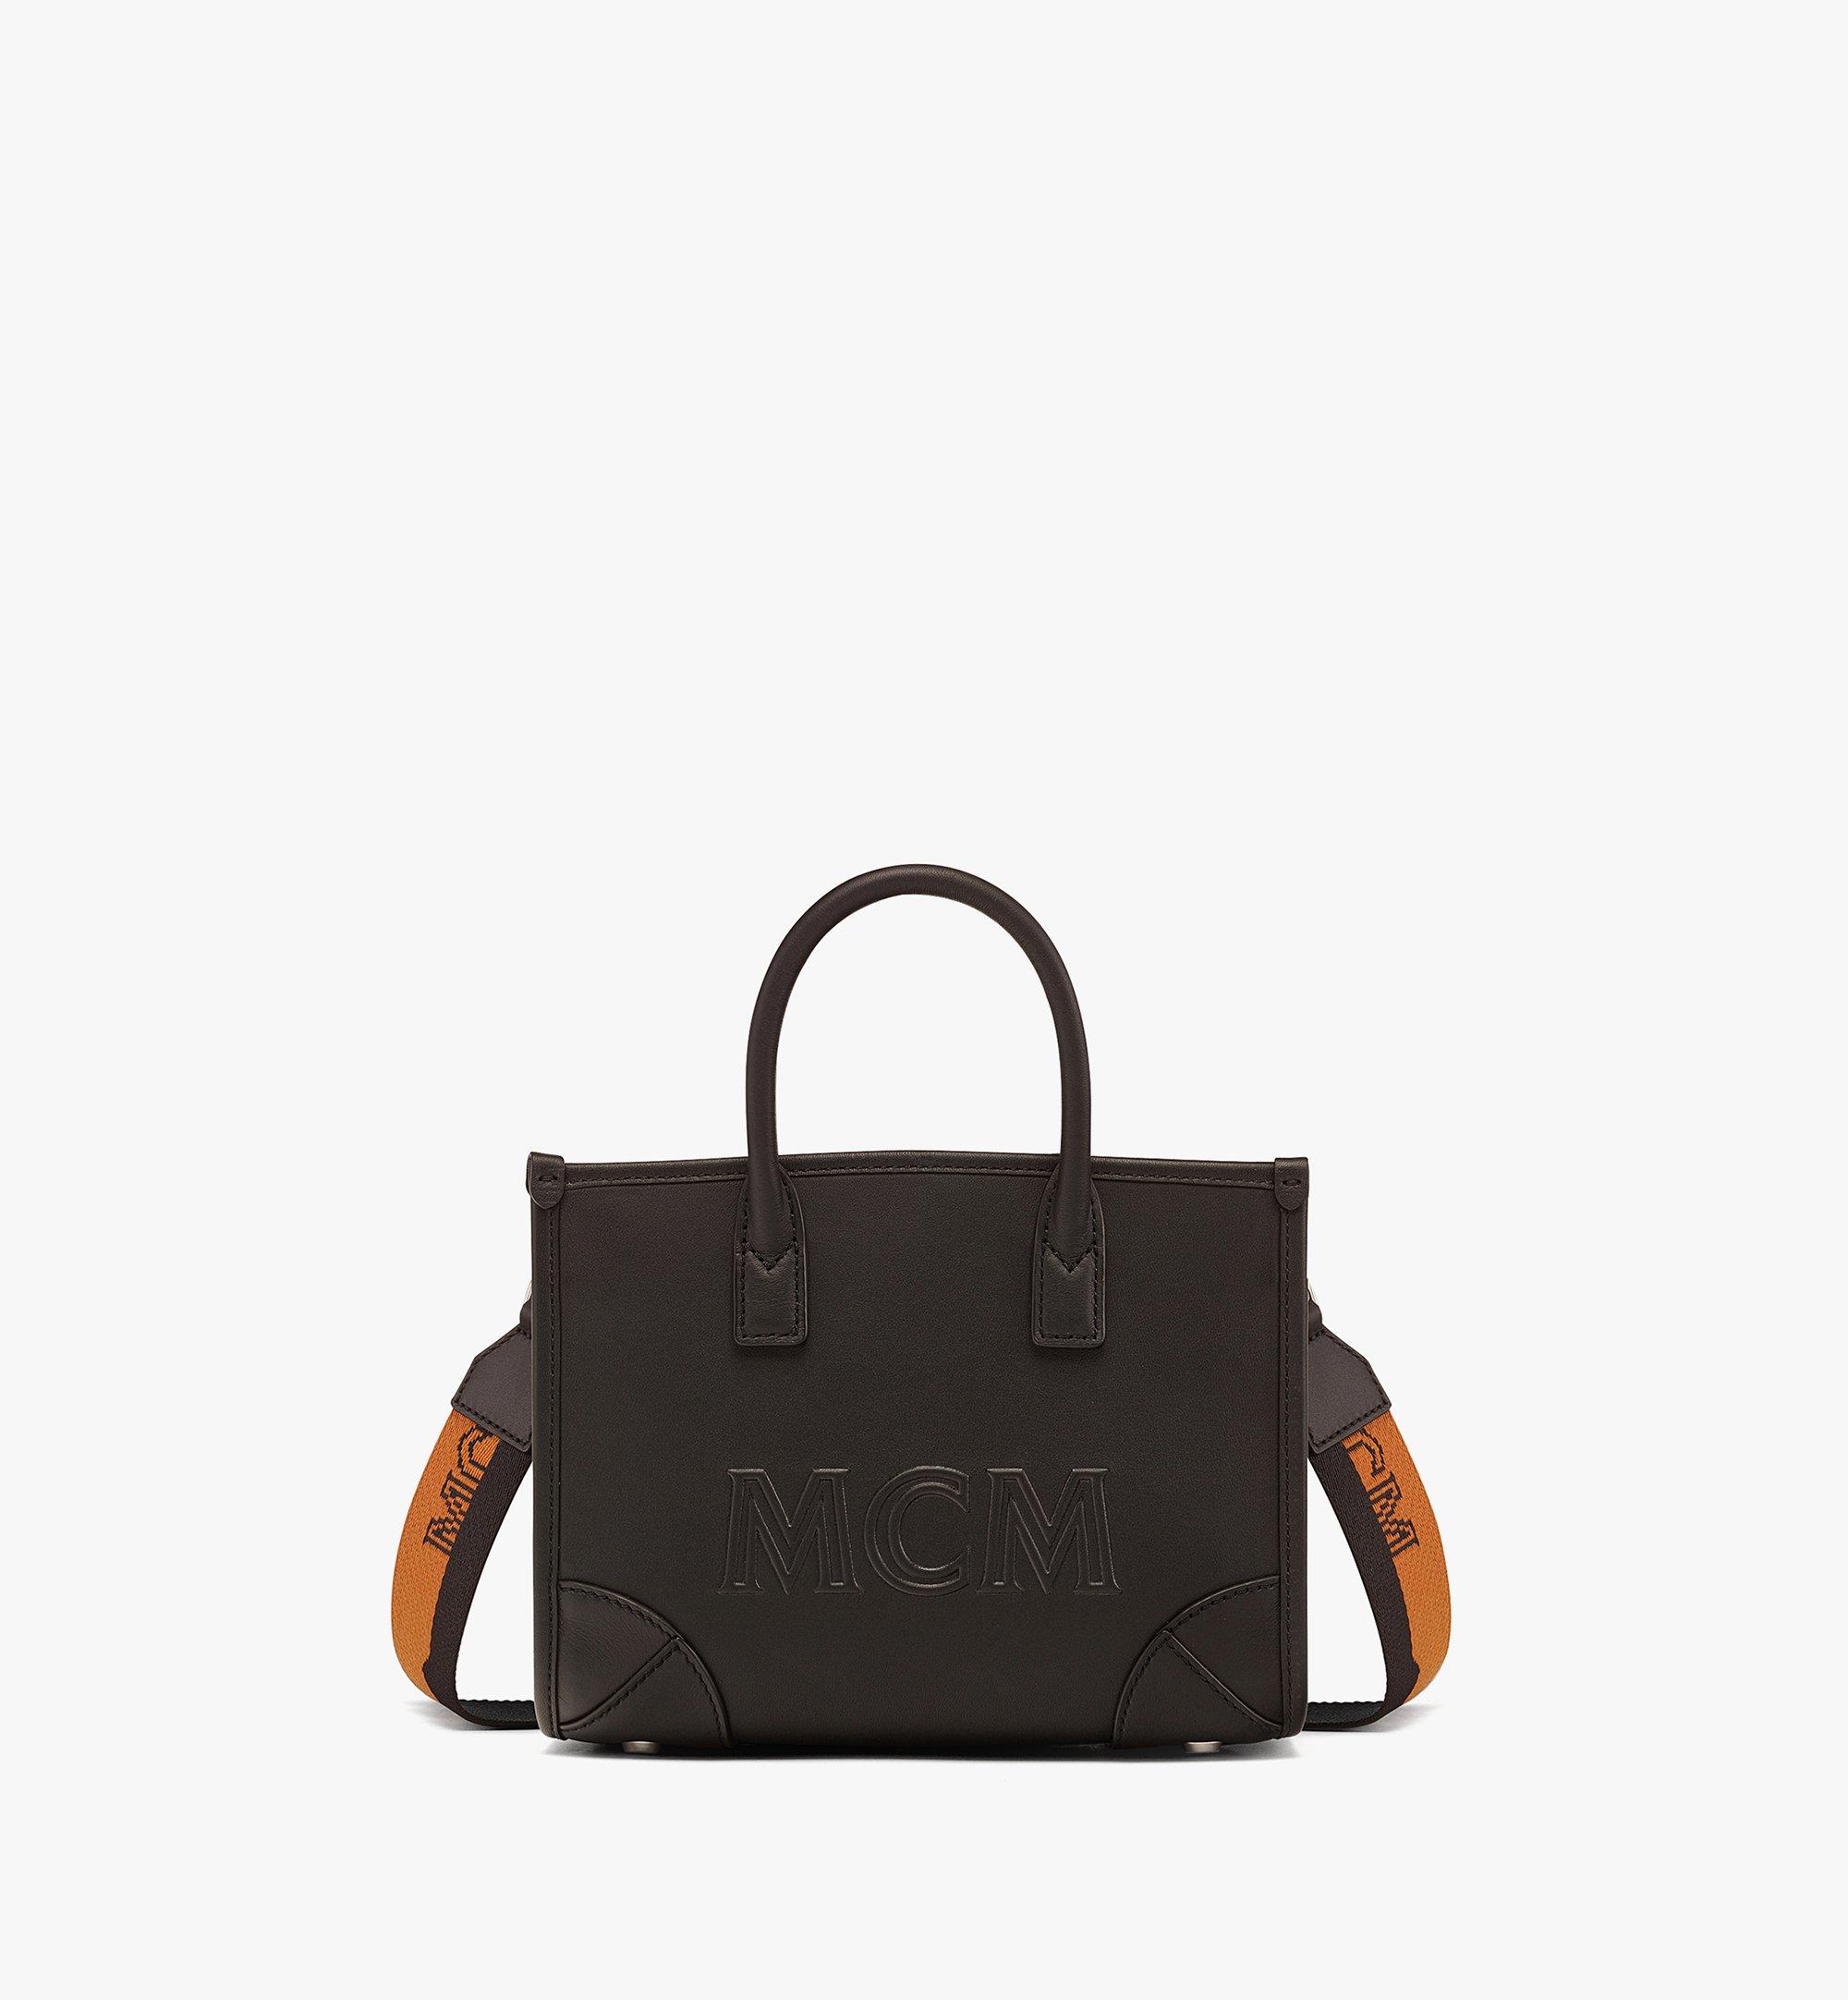 MCM Special Offer | Up to 40% Off